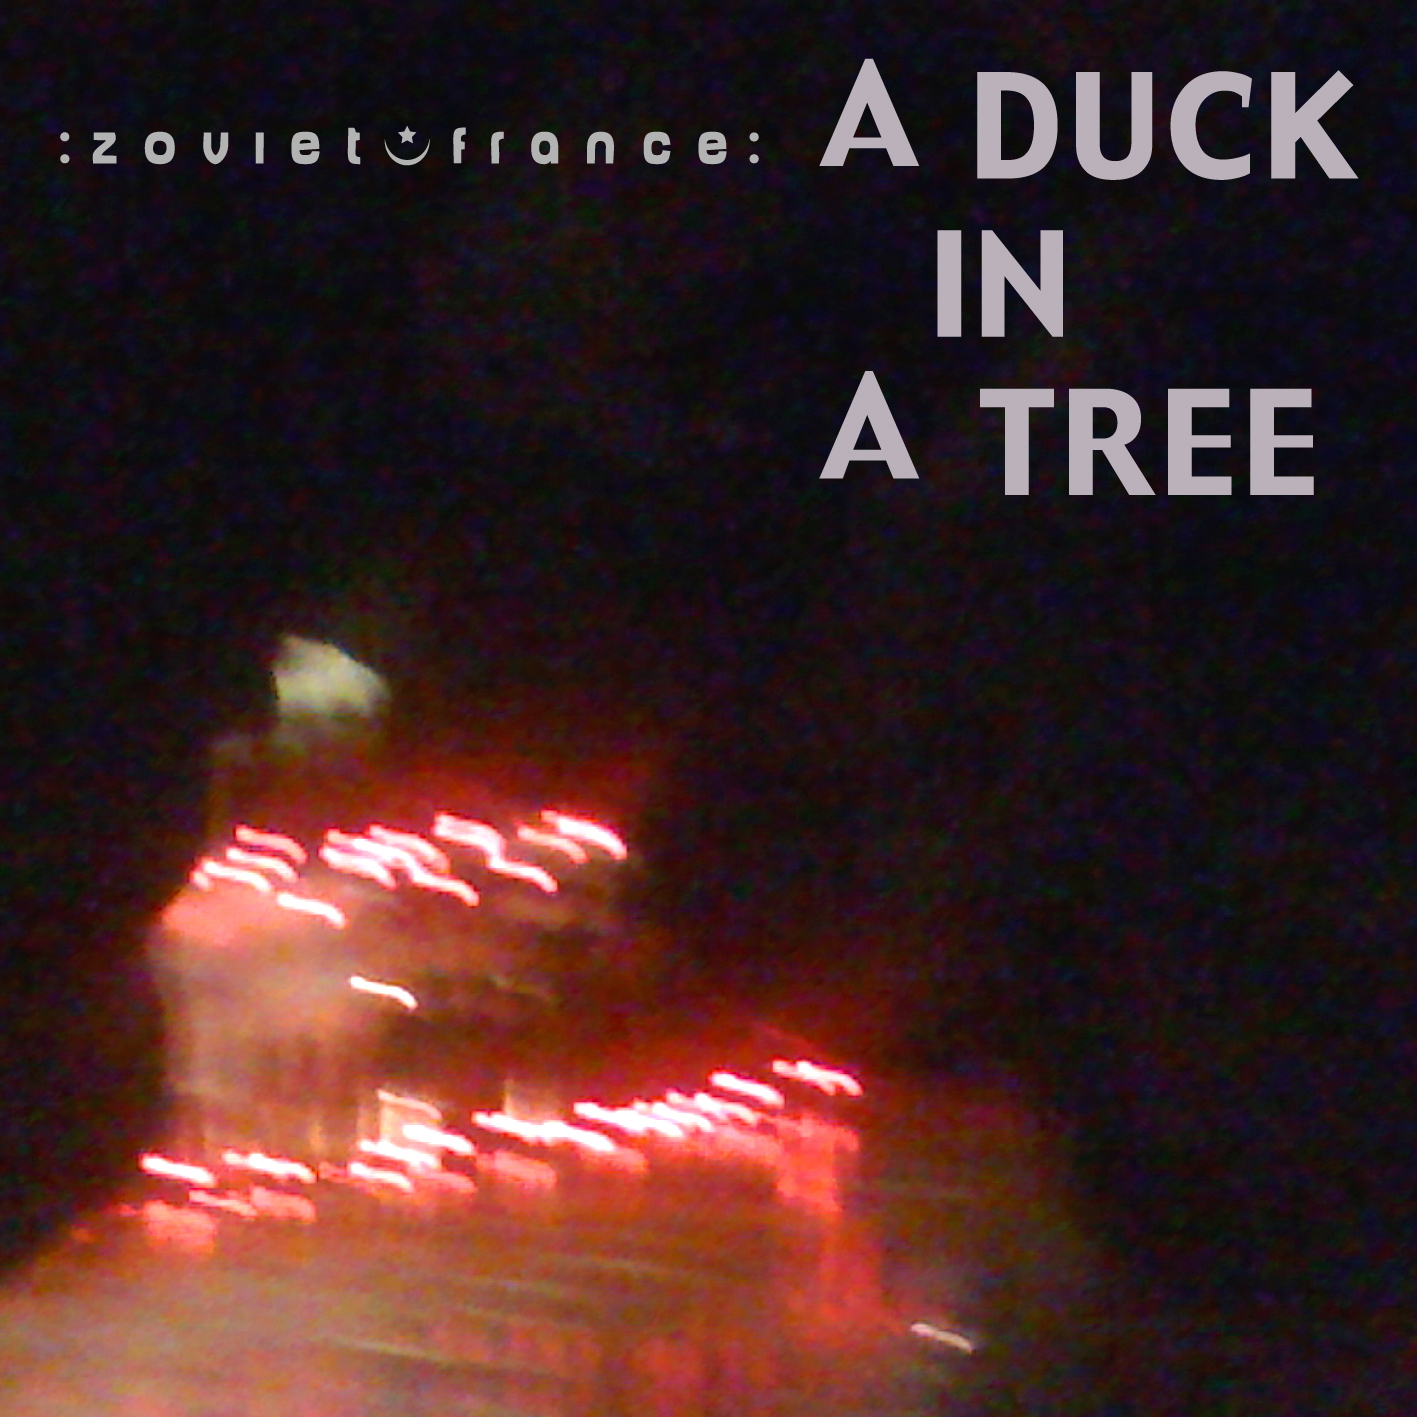 A-Duck-in-a-Tree-2012-10-13-_-The-Green-Shaded-Light-layout.jpg